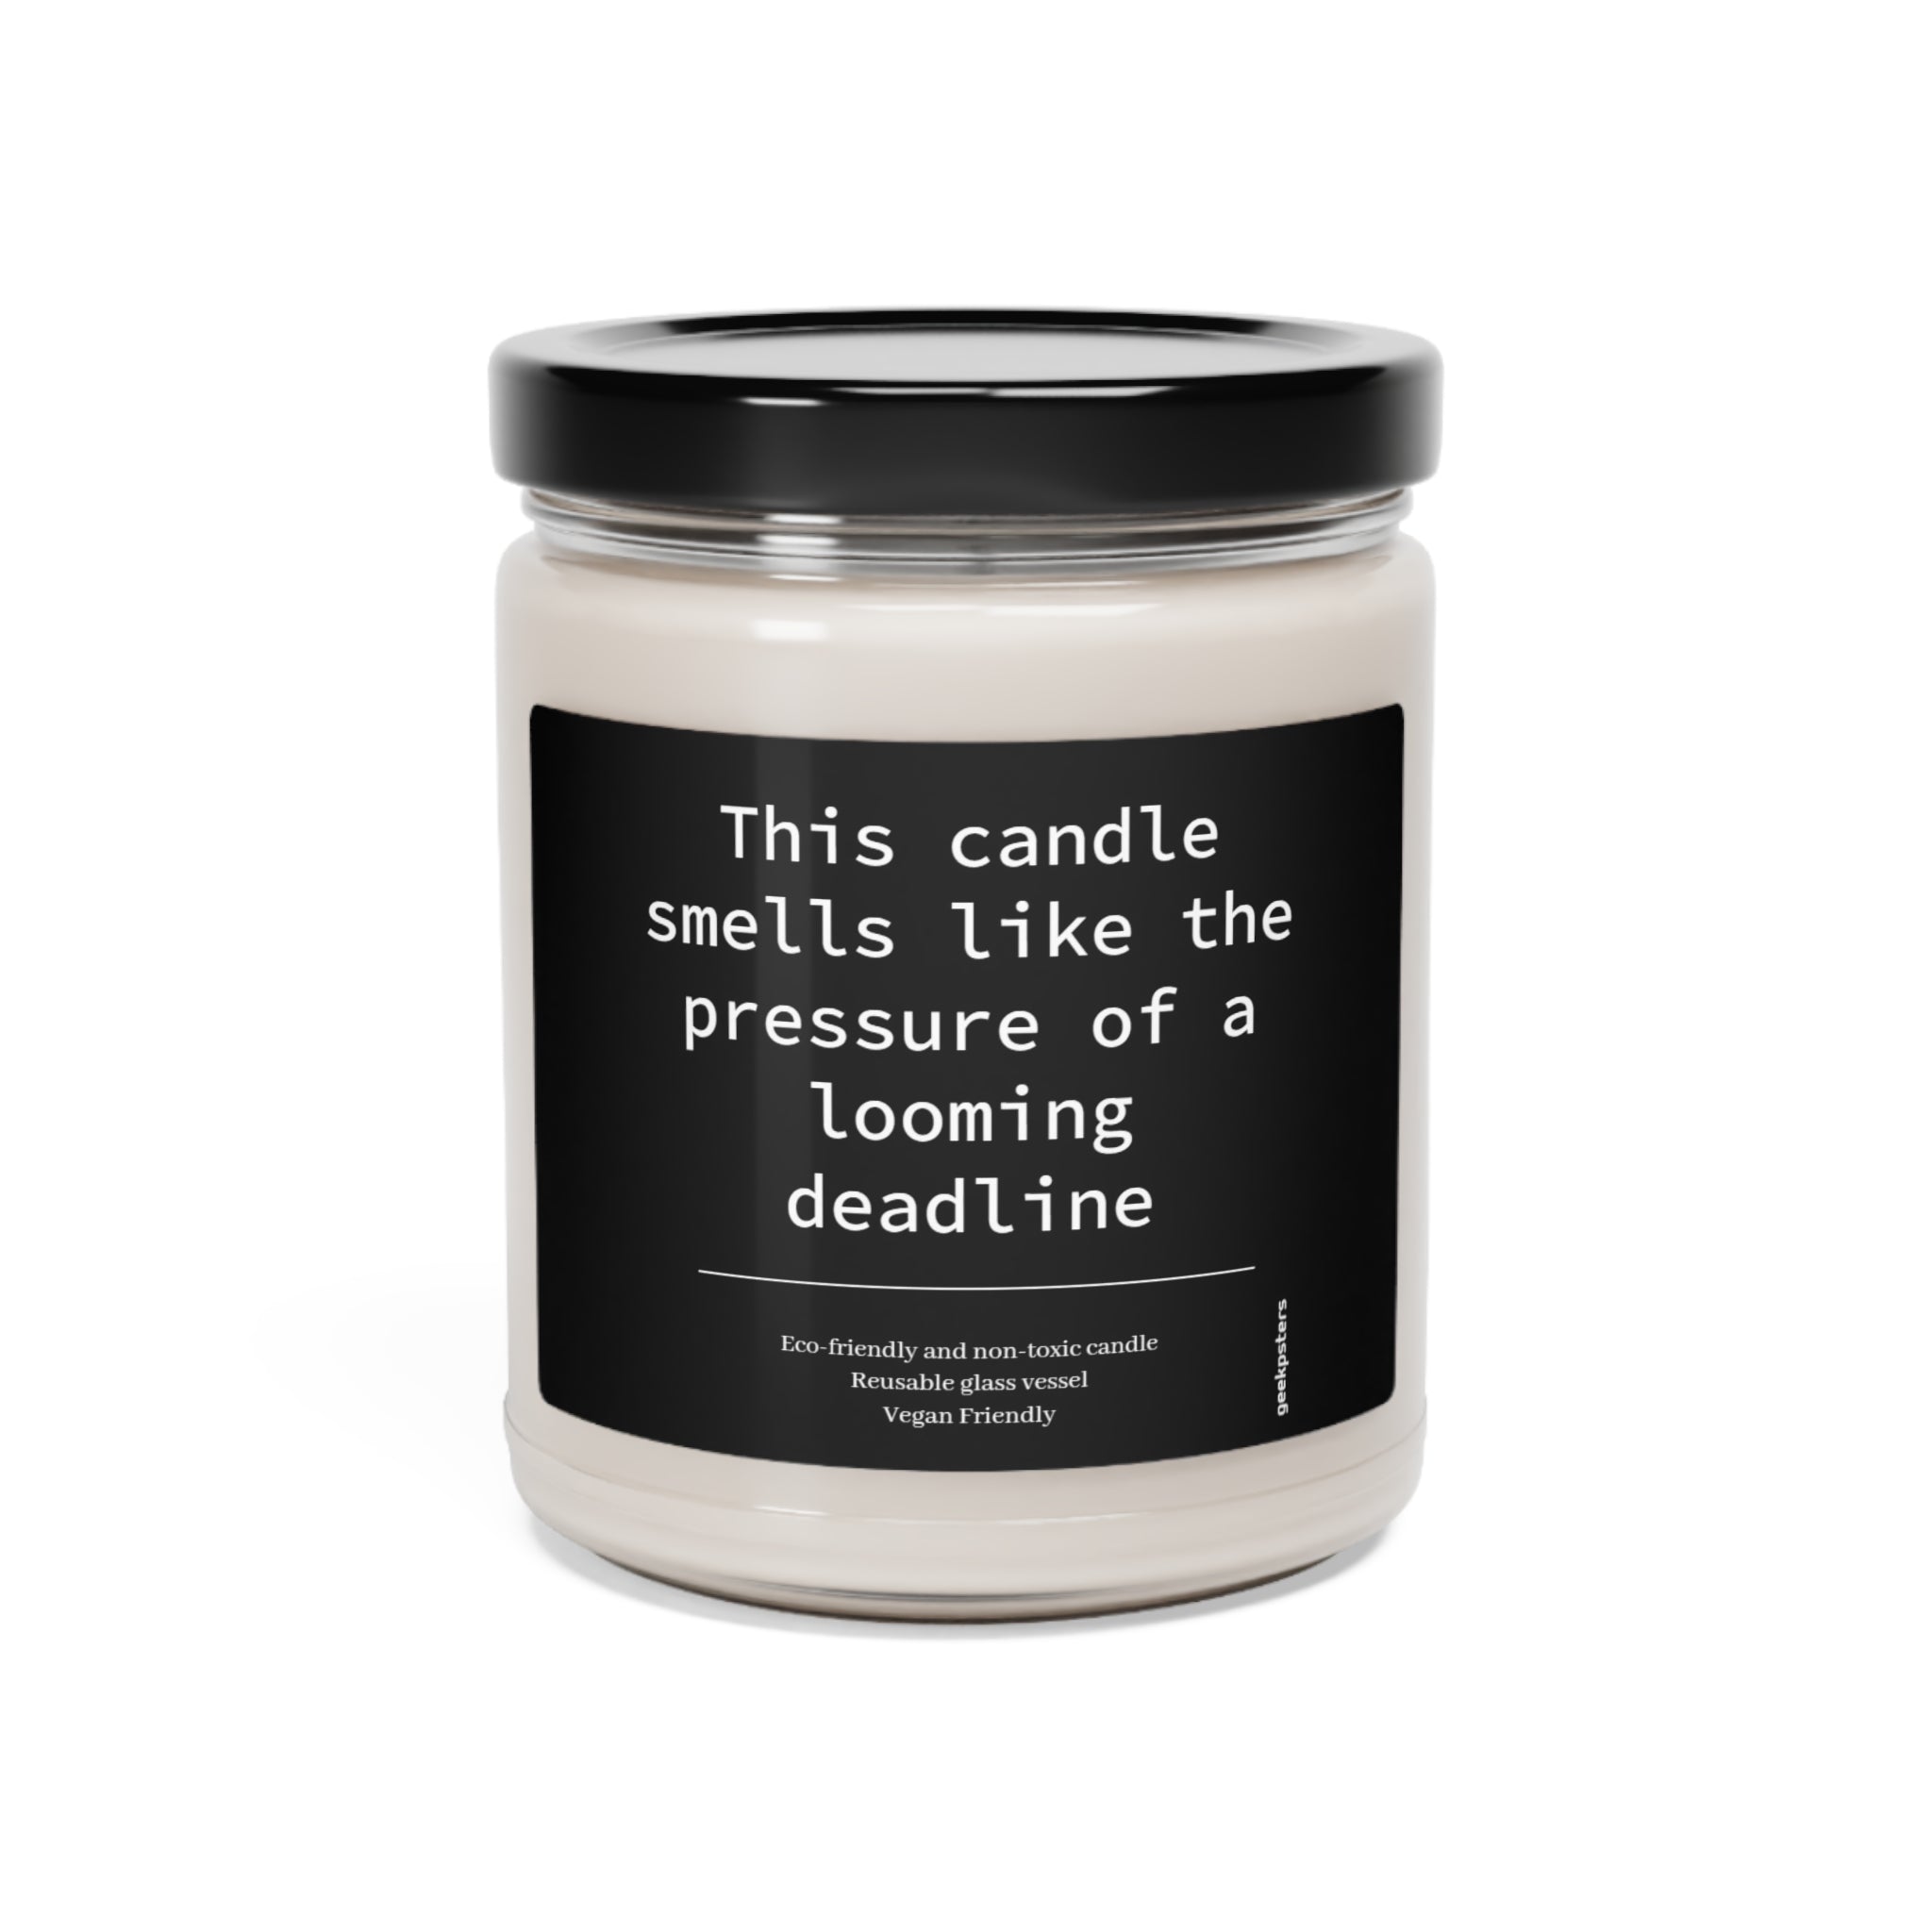 A "This Candle Smells Like the Pressure of a Looming Deadline" 9oz soy candle in a glass jar with the label, indicating it's eco-friendly and vegan-friendly.